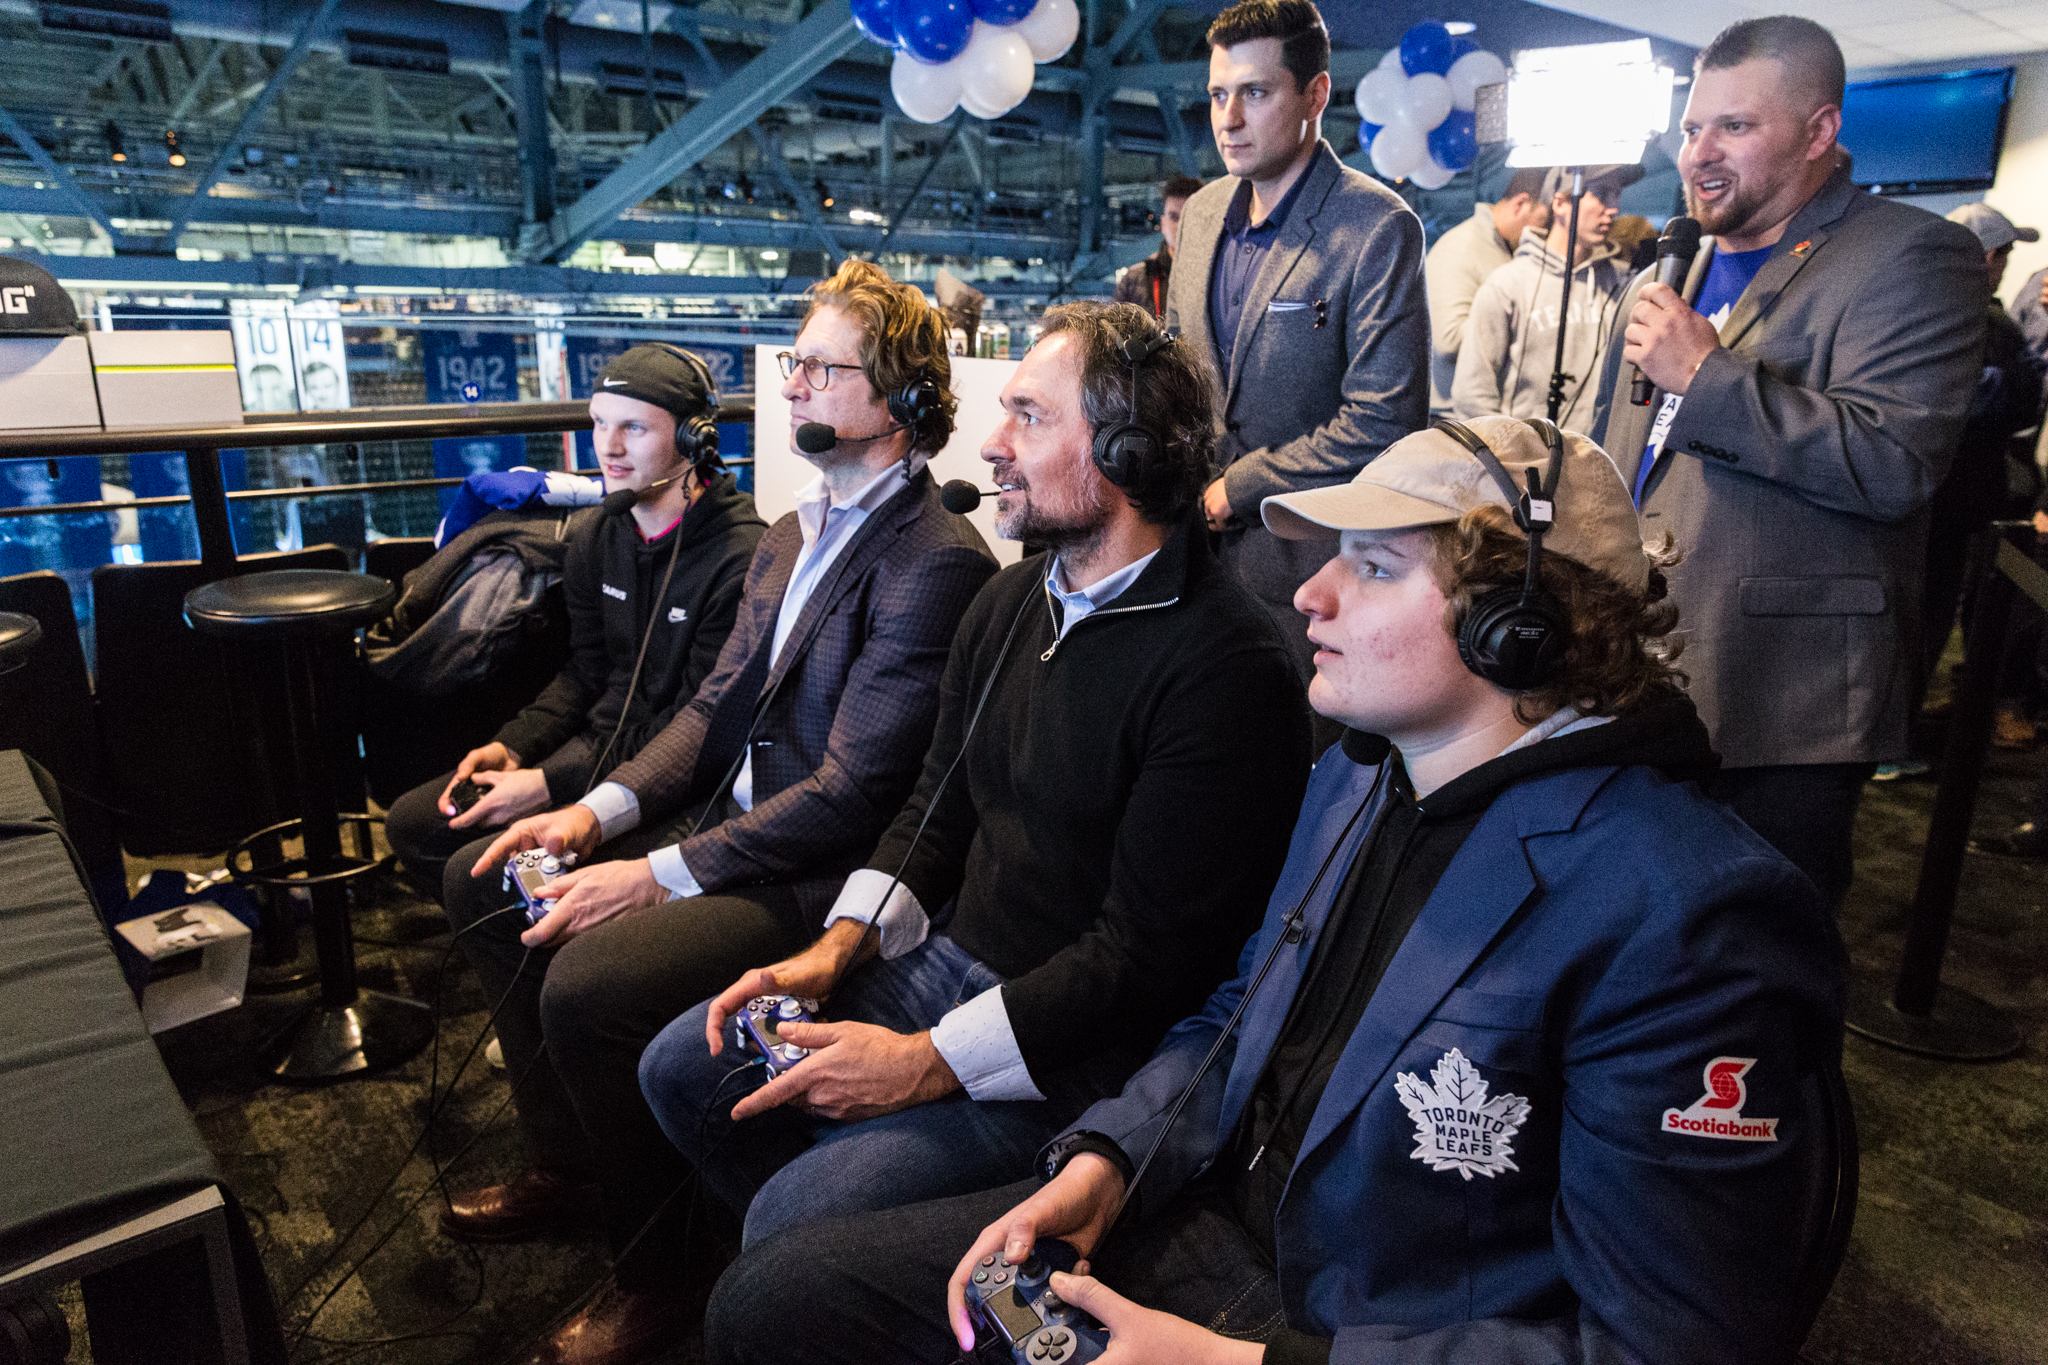 The Leafs Gaming League